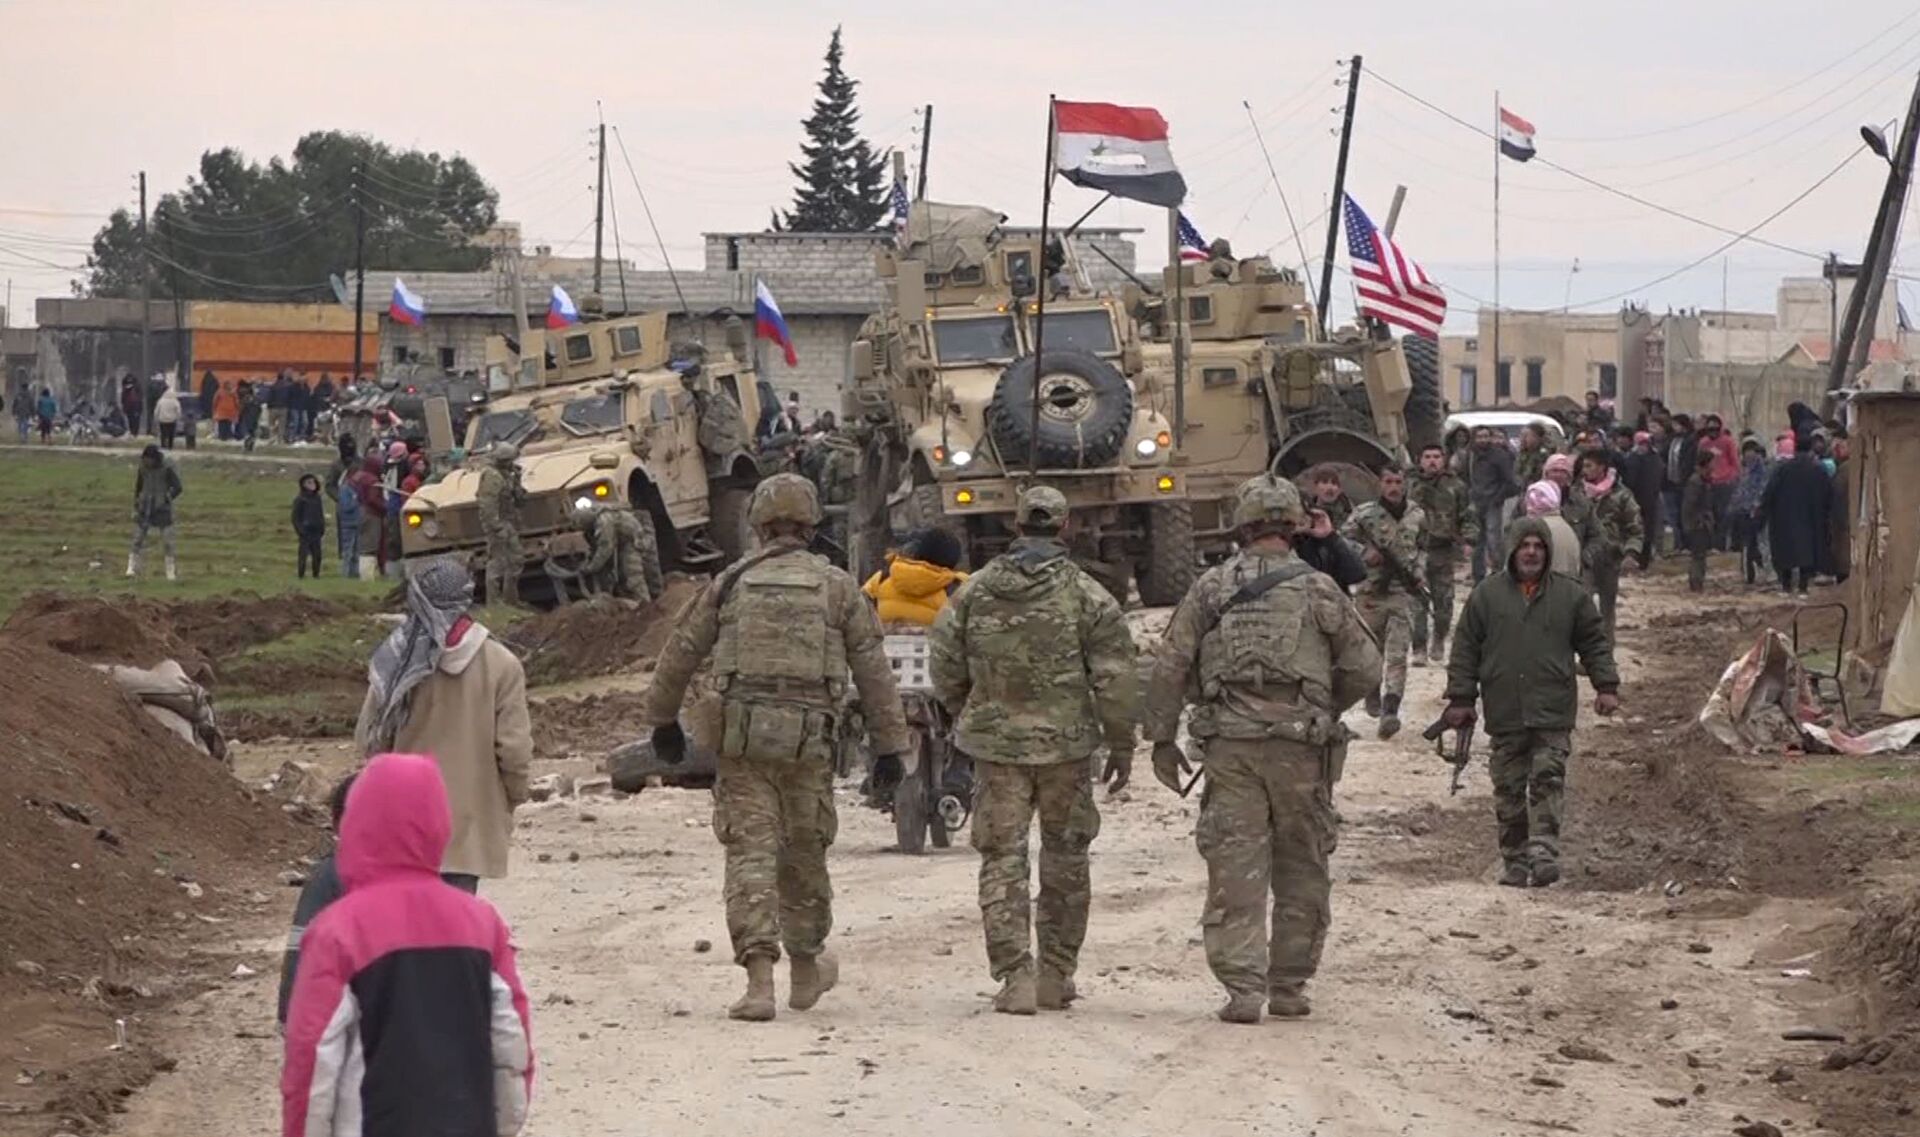 In this frame grab from video, Russian, Syrian and others gather next to an American military convoy stuck in the village of Khirbet Ammu, east of Qamishli city, Syria, Wednesday, Feb. 12, 2020. The Syrian official news agency SANA, said Wednesday, that locals had gathered at an army checkpoint, pelting the U.S. convoy with stones and taking down a U.S. flag flying on a vehicle when troops fired with live ammunition and smoke bombs. (AP Photo) - Sputnik International, 1920, 07.09.2021